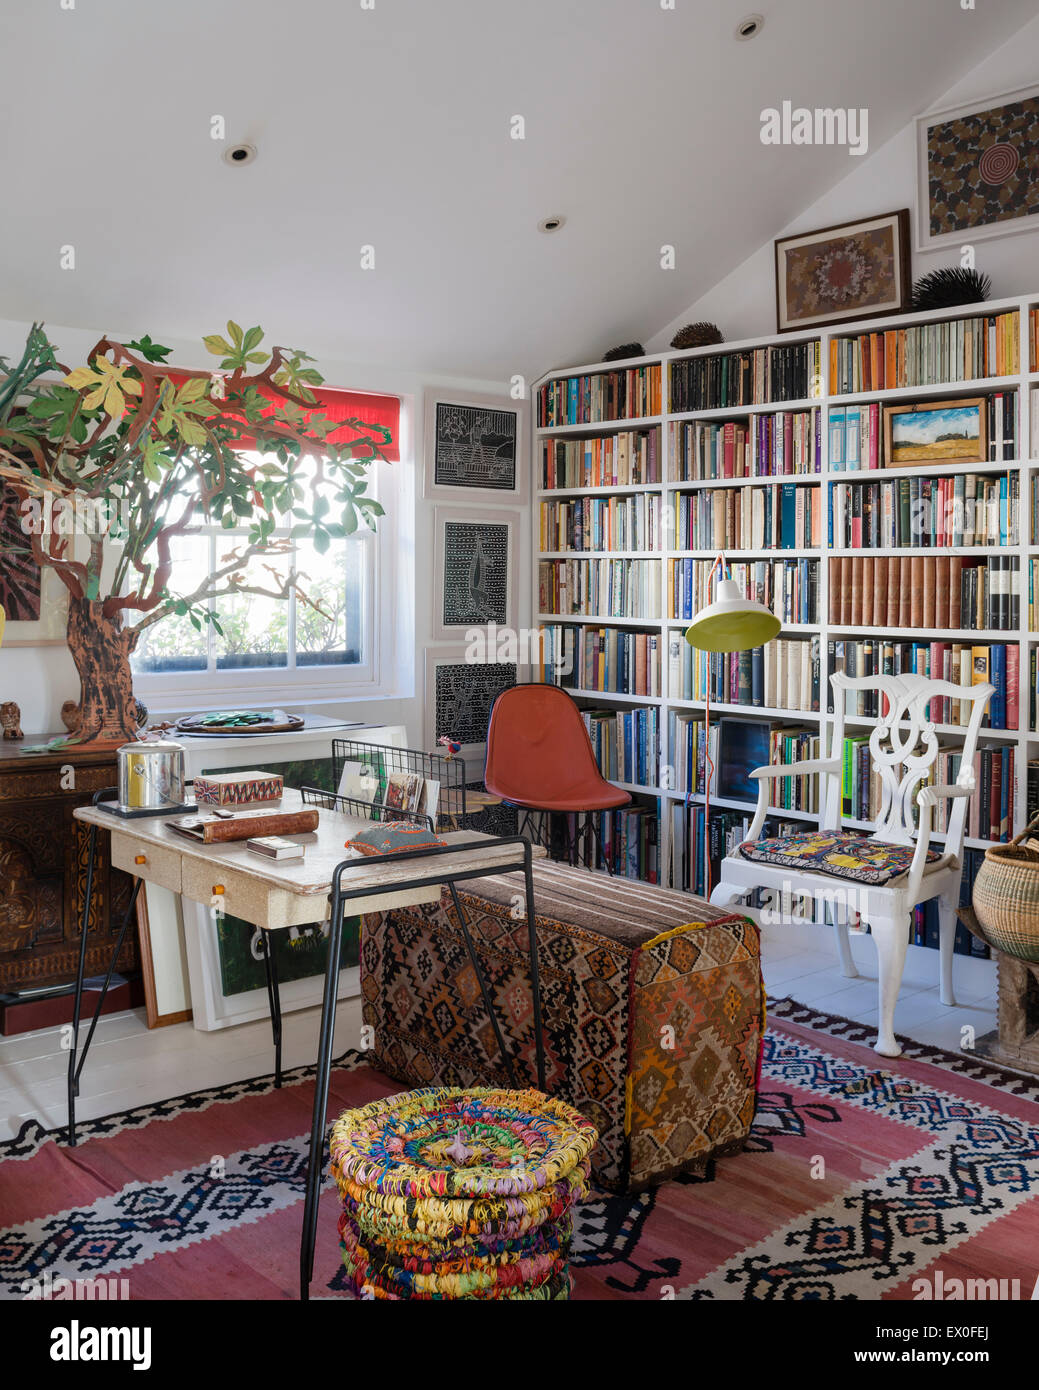 Inbuilt book shelving in living room with uzbek rug, kilim covered bench and aboriginal wall art Stock Photo